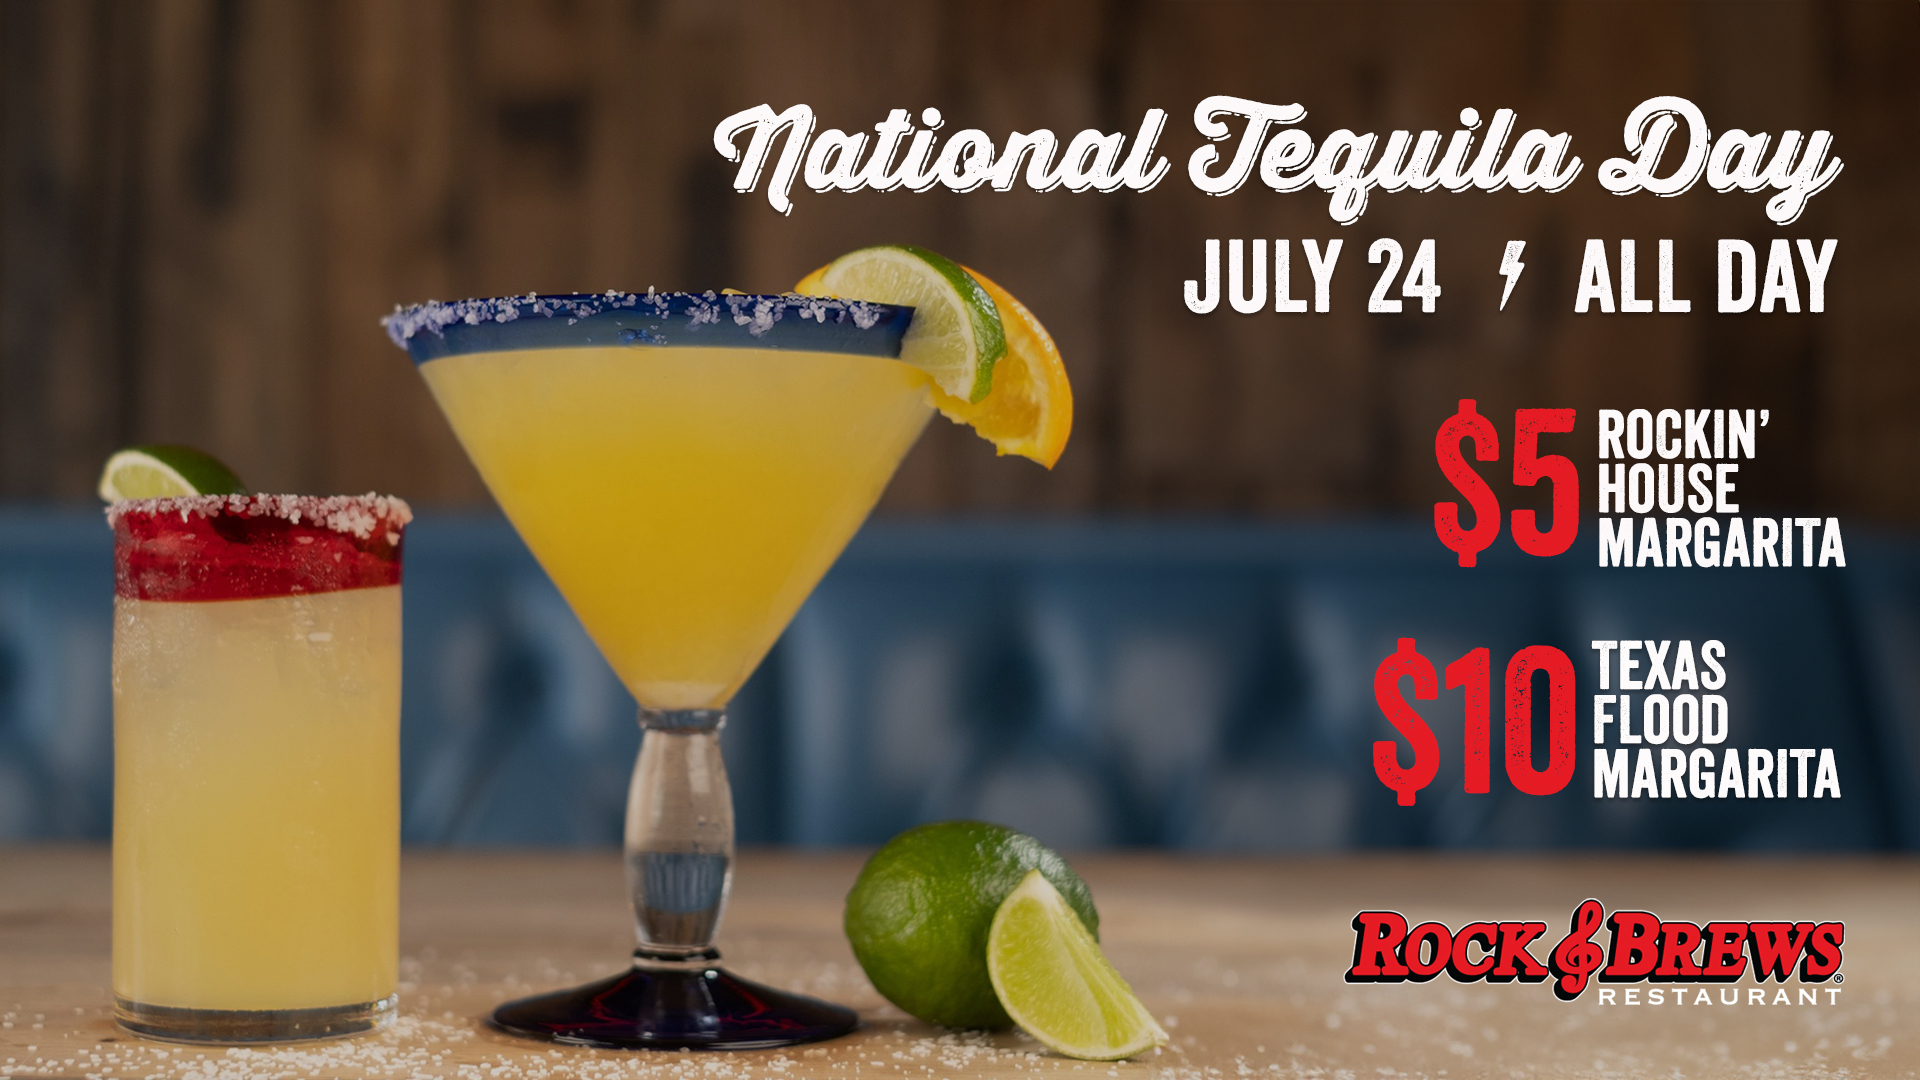 National Tequila Day at Rock & Brews